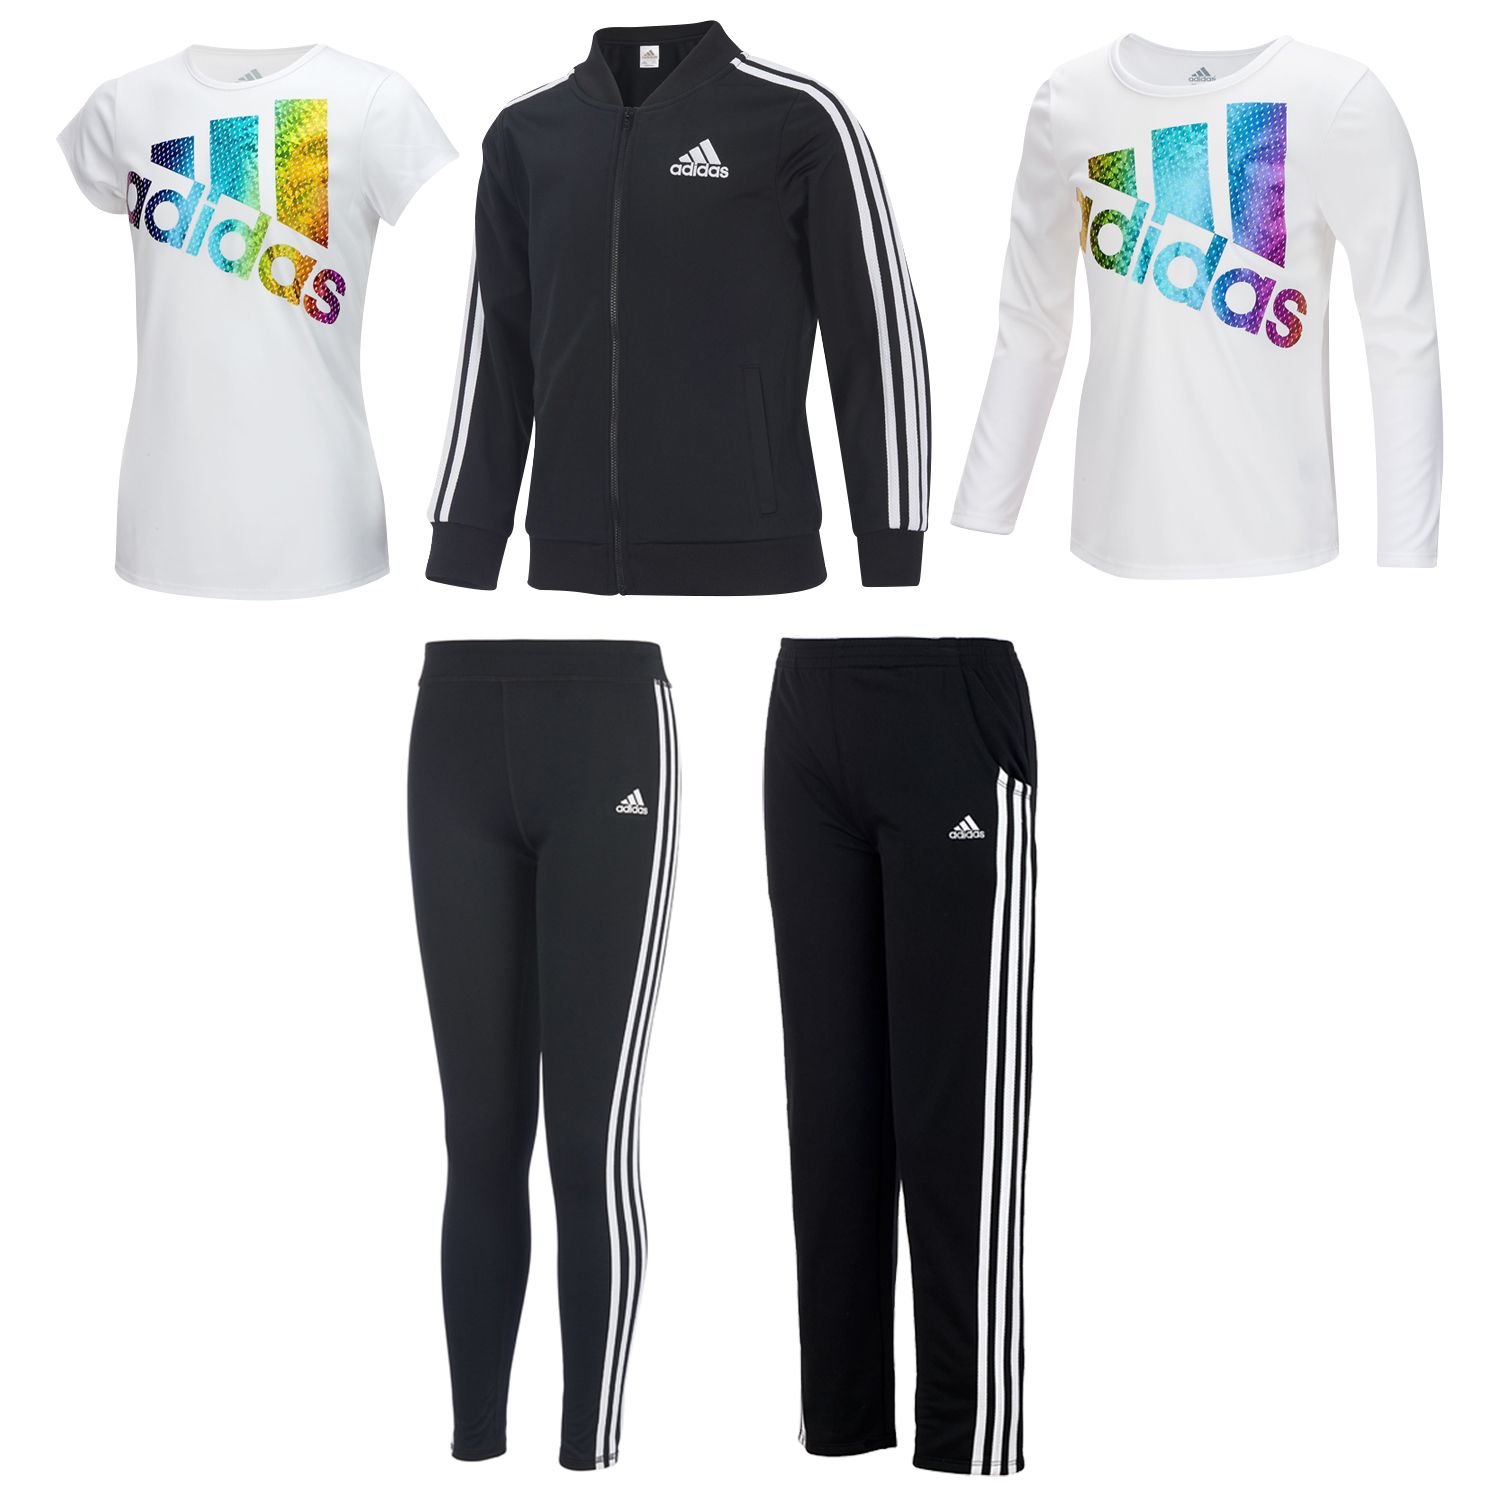 adidas outfits for teens